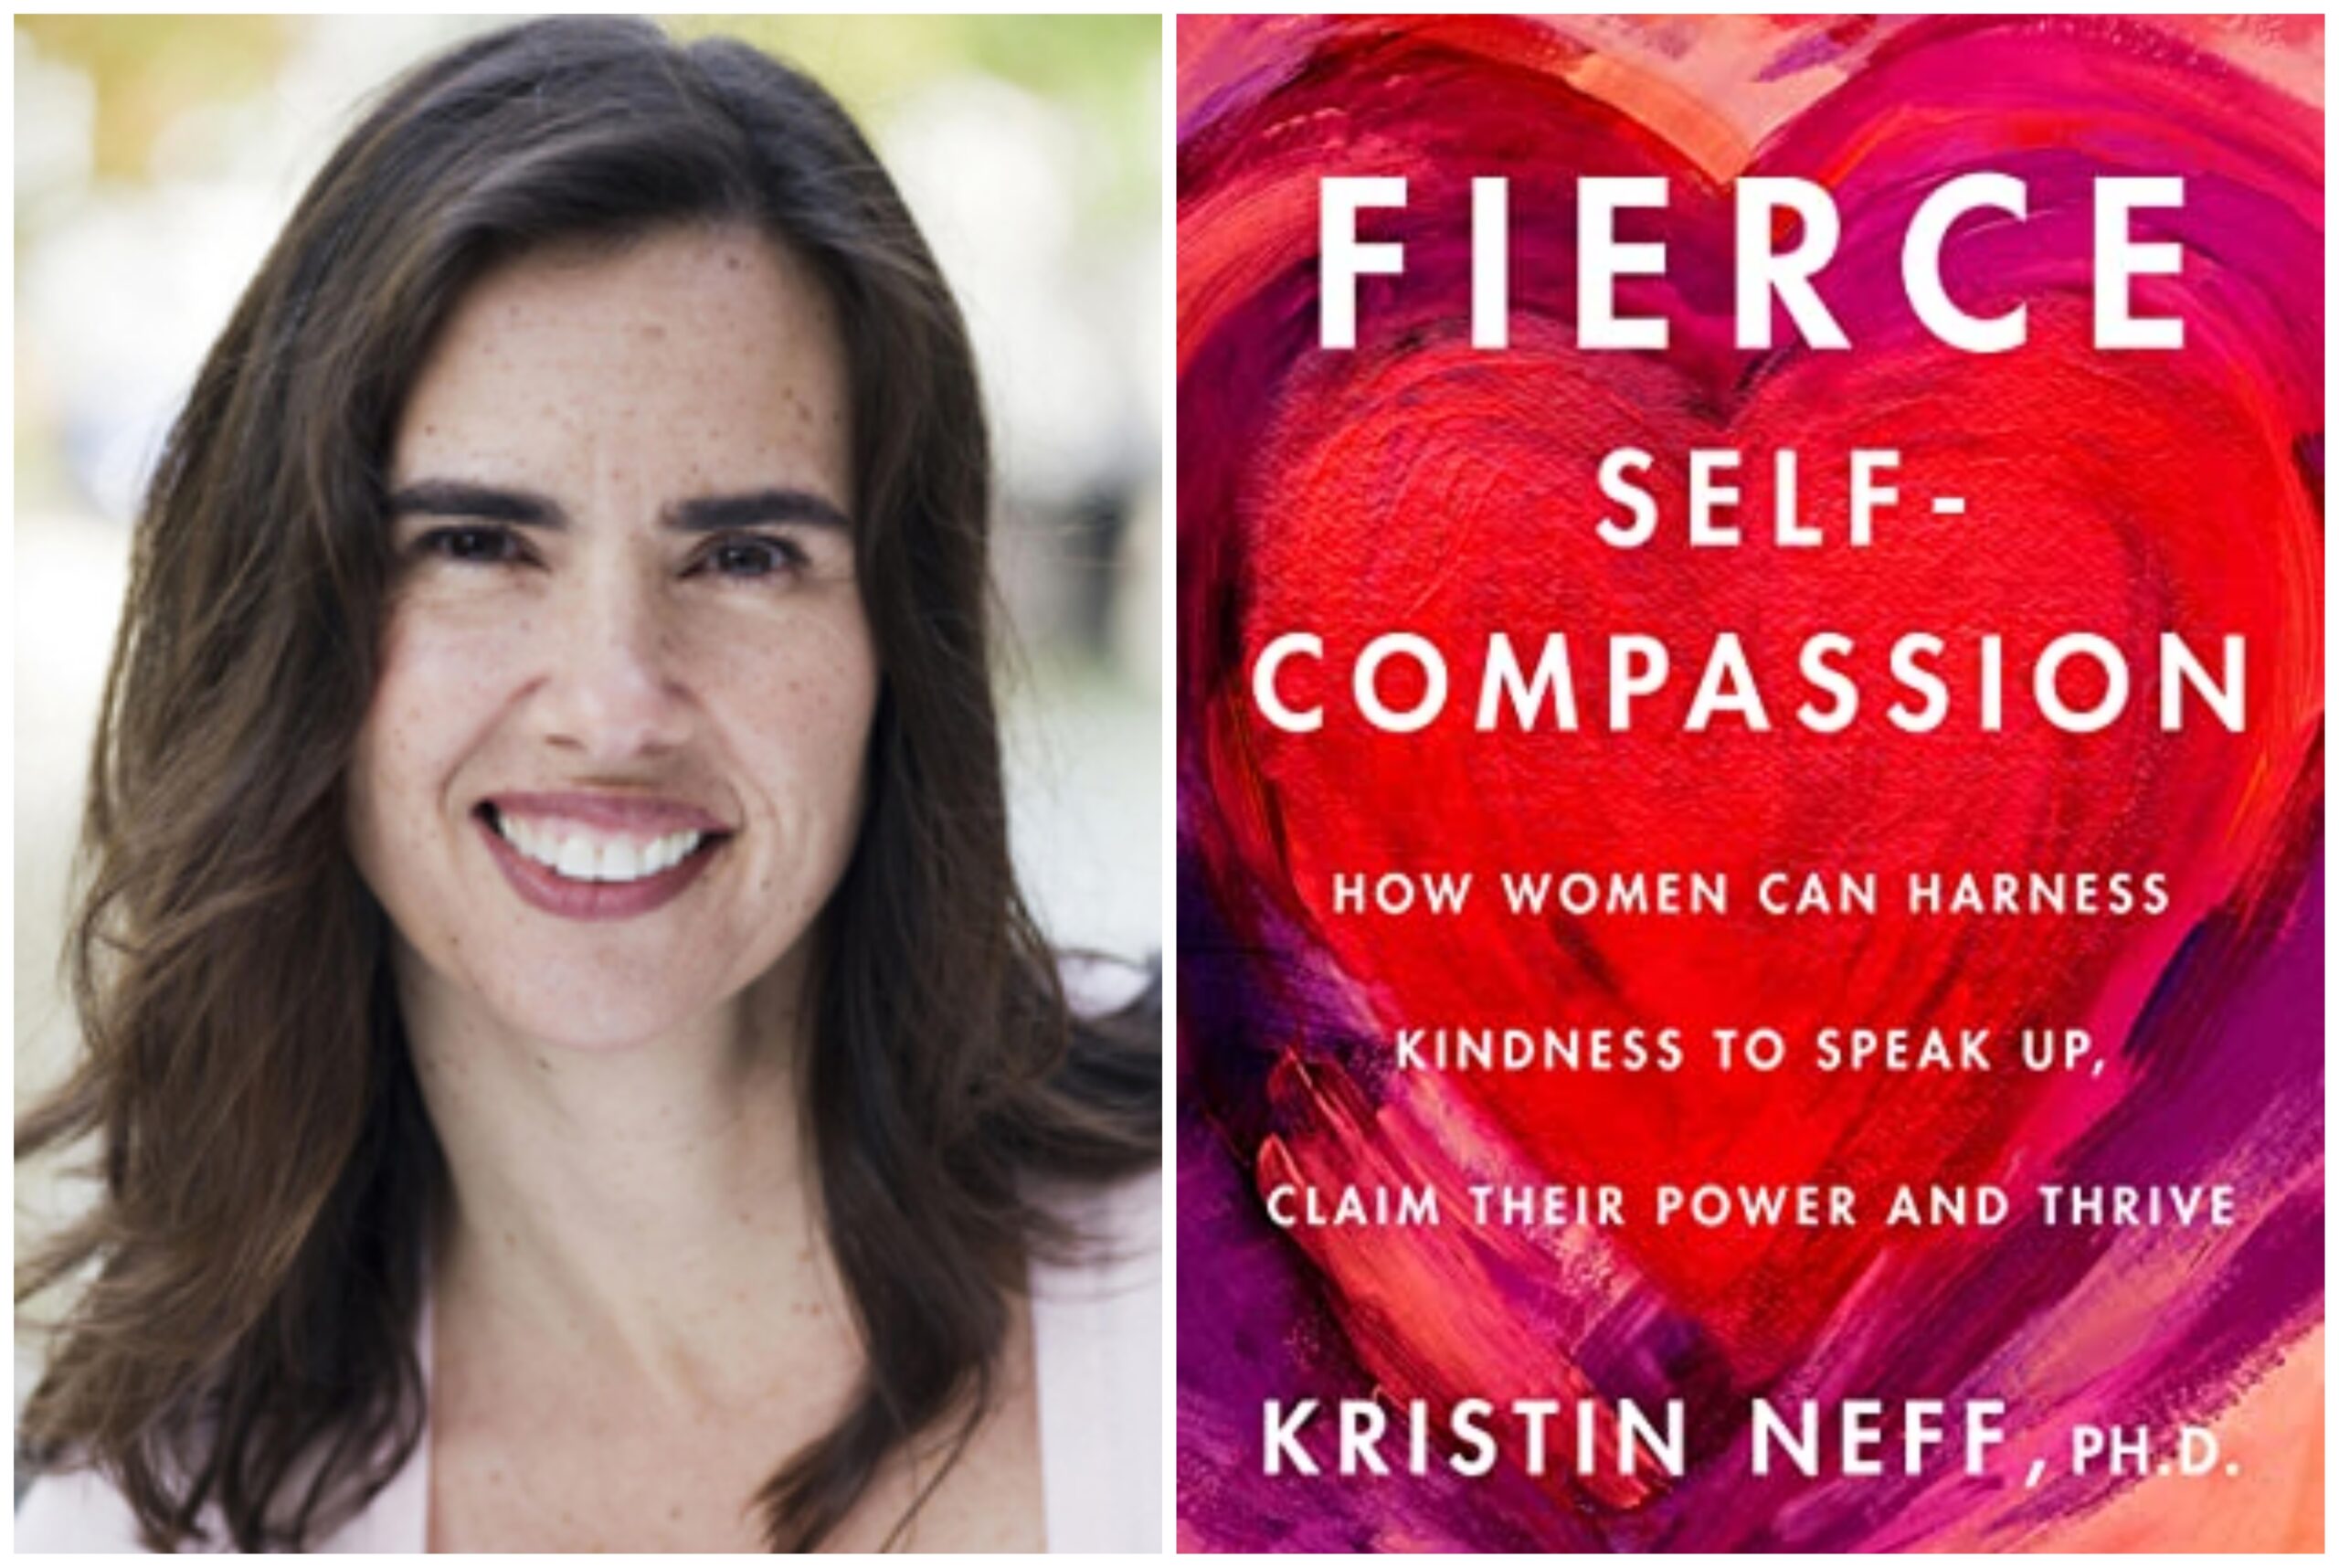 Author Kristin Neff and the cover of her new book